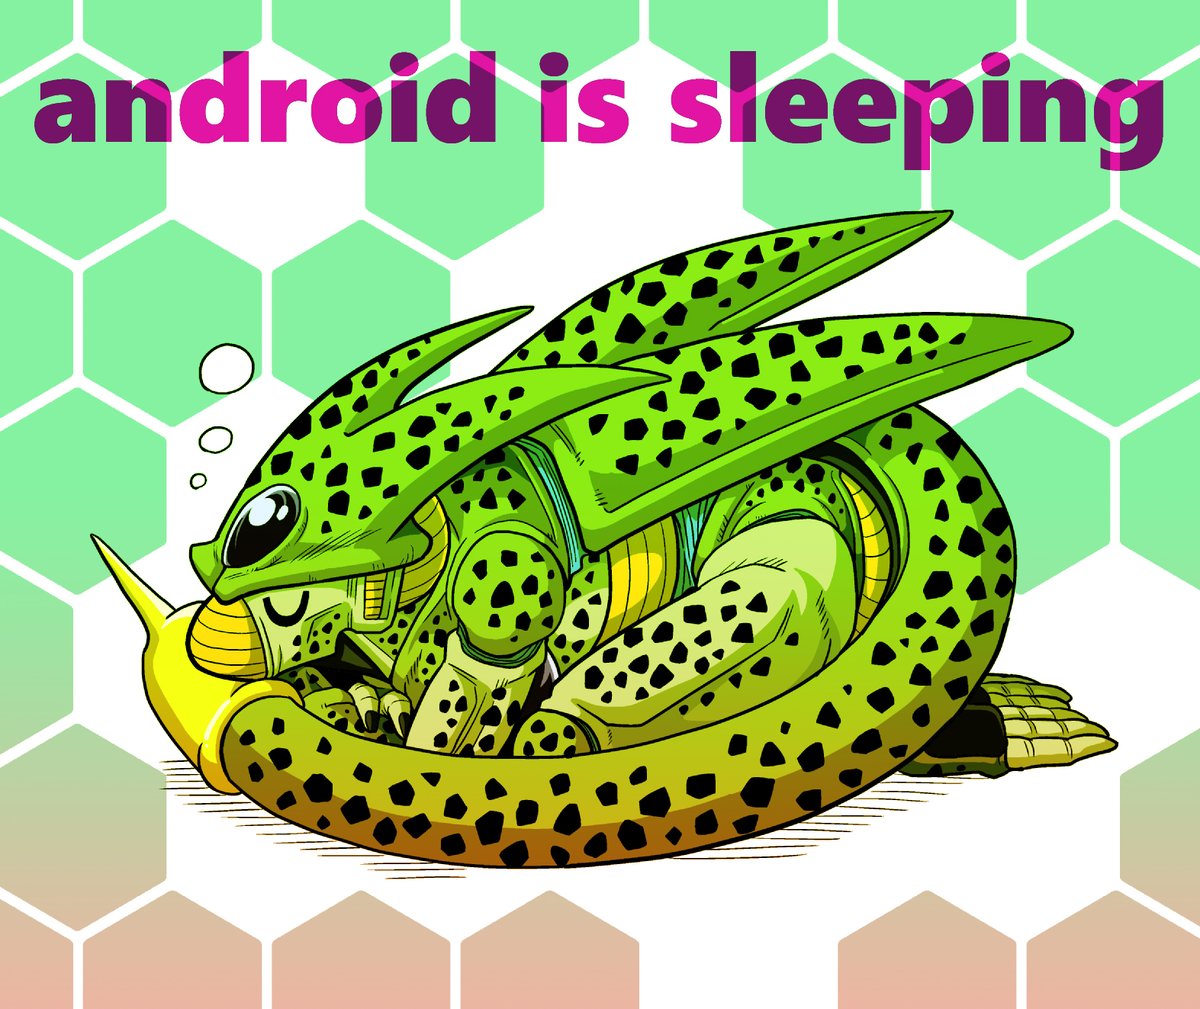 「android is sleeping 」|よるのイラスト